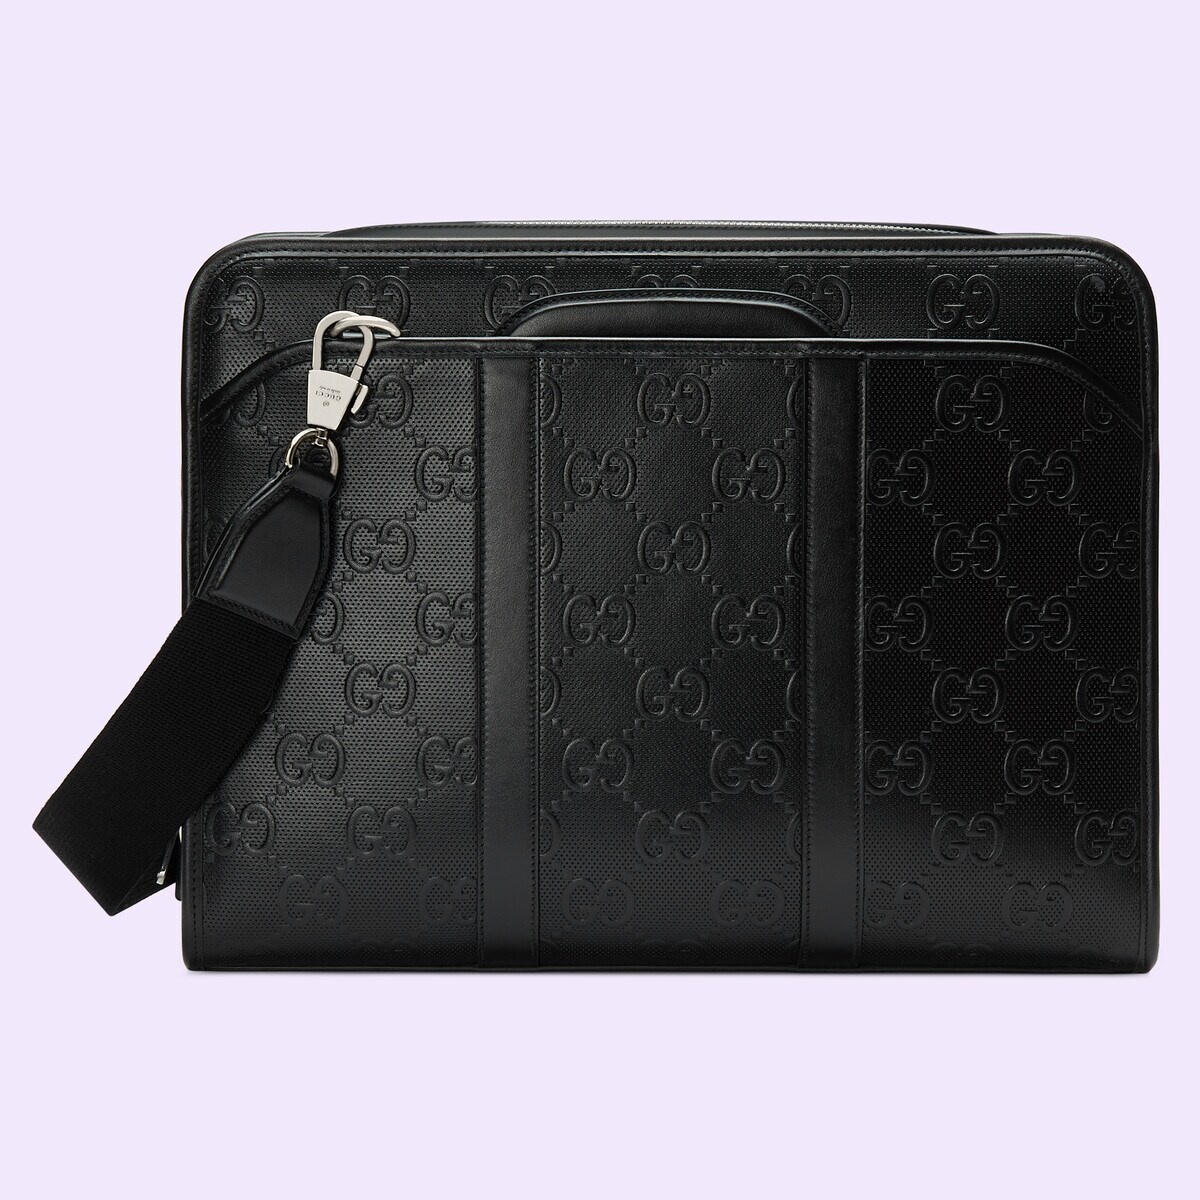 GG embossed briefcase - 6